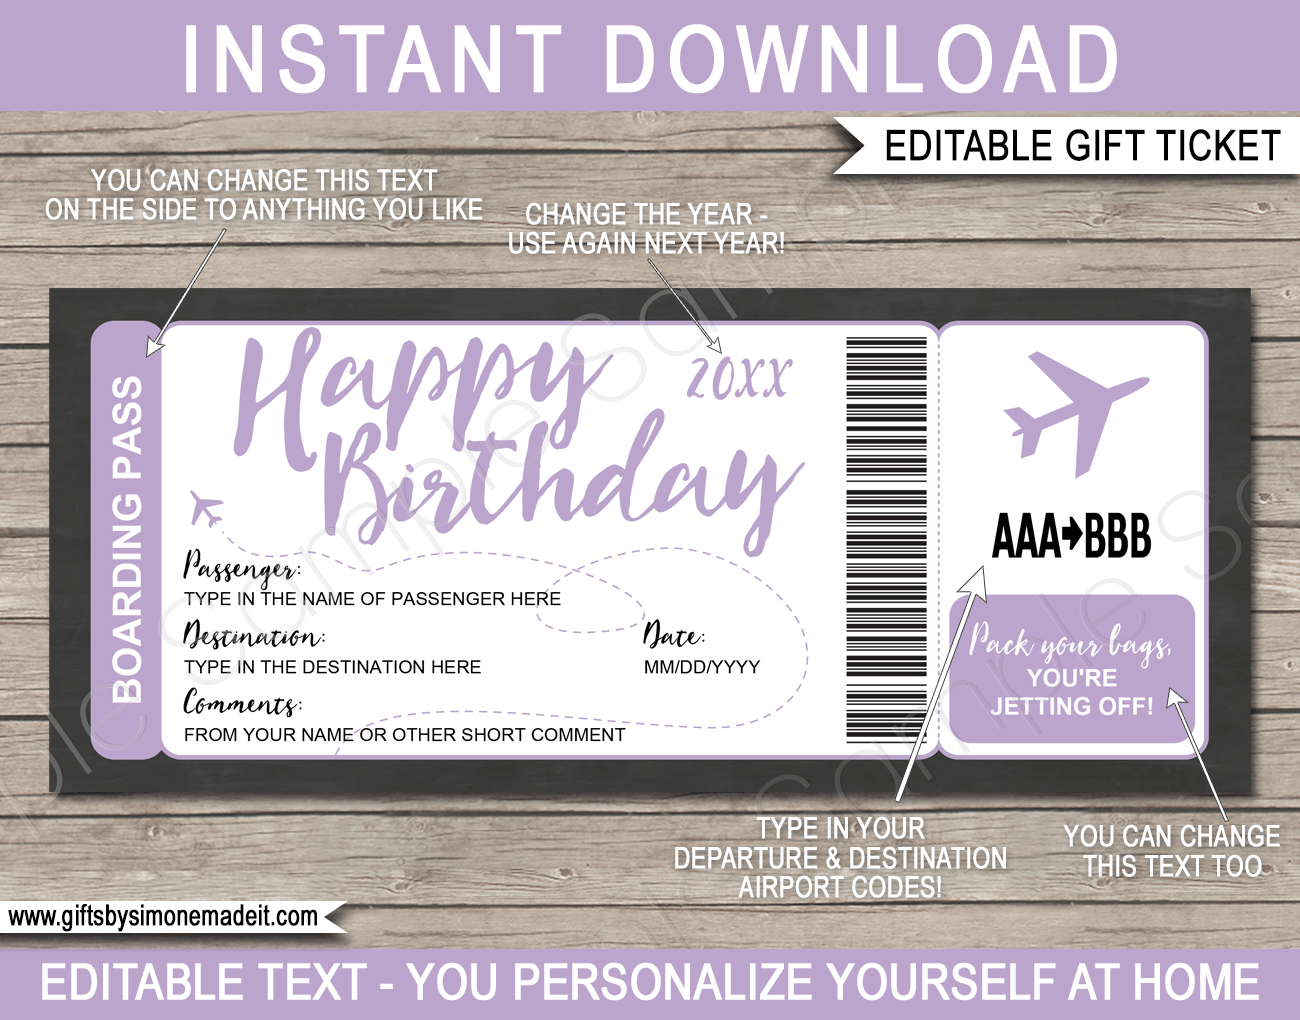 Printable Lilac Birthday Surprise Trip Boarding Pass Template | Fake Plane Ticket Gift | Surprise Birthday Trip Reveal | Flight, Holiday, Getaway, Vacation | INSTANT DOWNLOAD via giftsbysimonemadeit.com